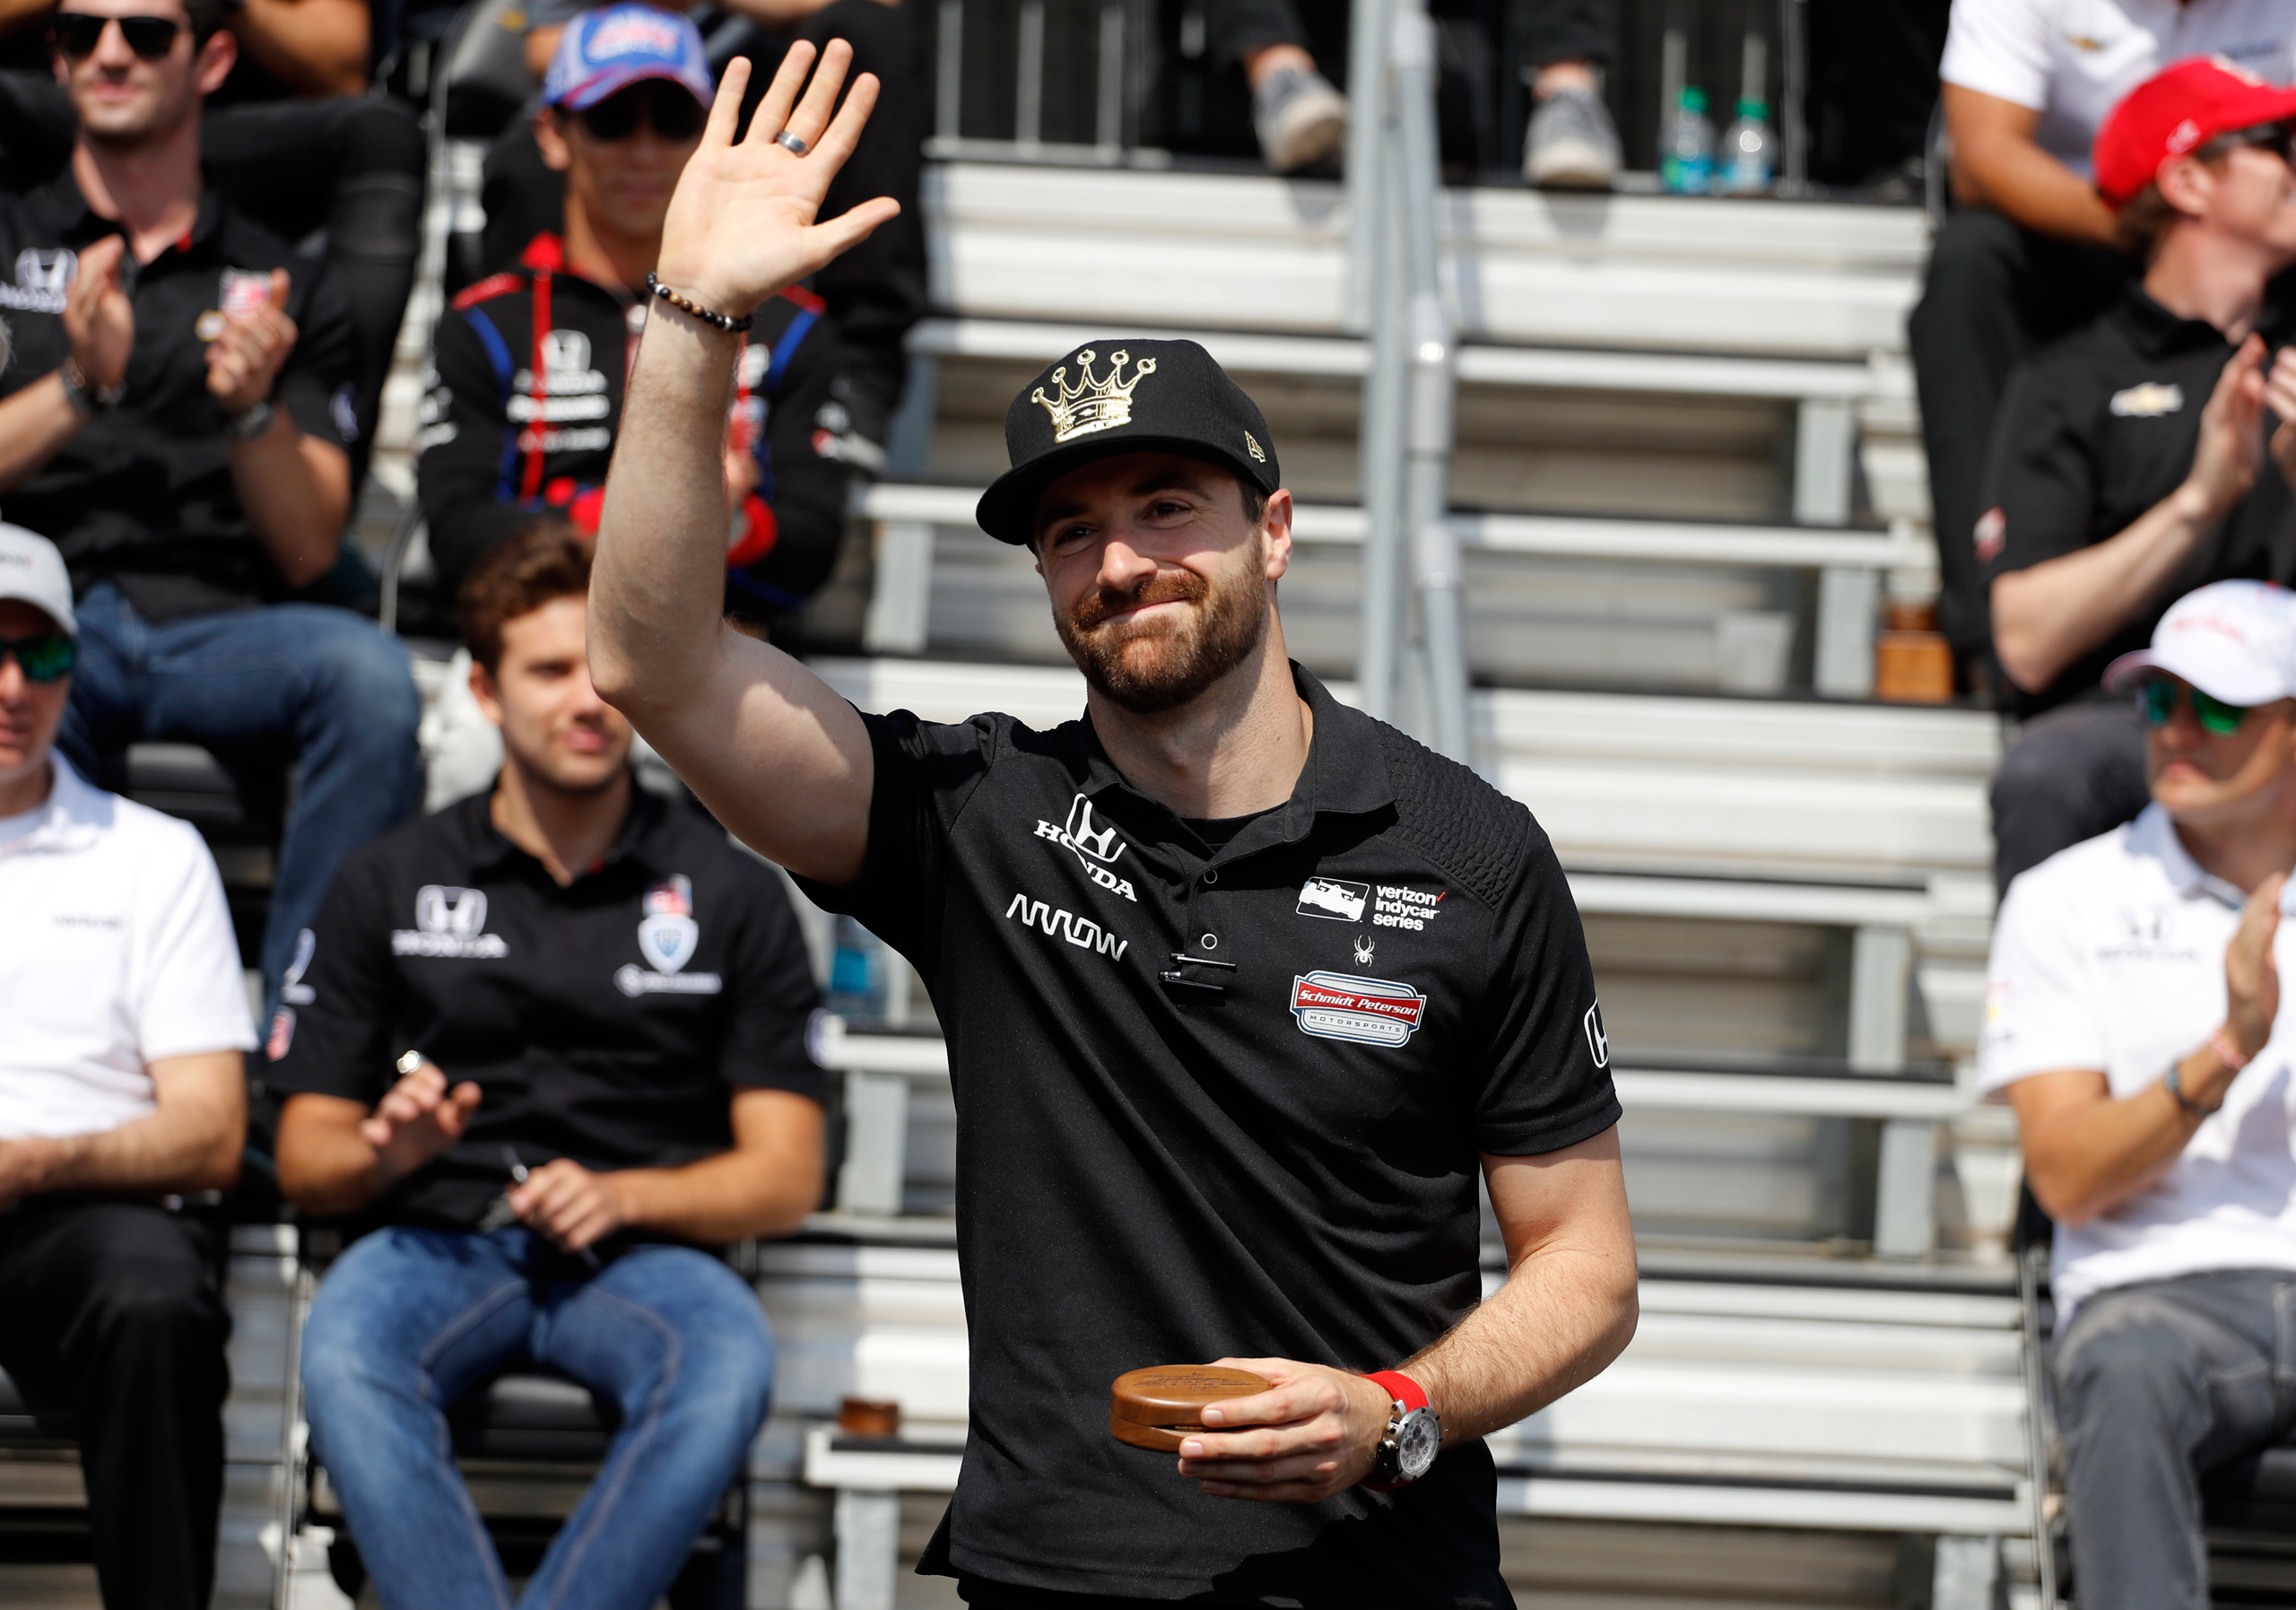 Pole sitter James Hinchcliffe, of Canada, waves to fans during the drivers meeting for the Indianapolis 500 auto race at Indianapolis Motor Speedway in Indianapolis, Saturday, May 28, 2016. (AP Photo/Jeff Roberson)